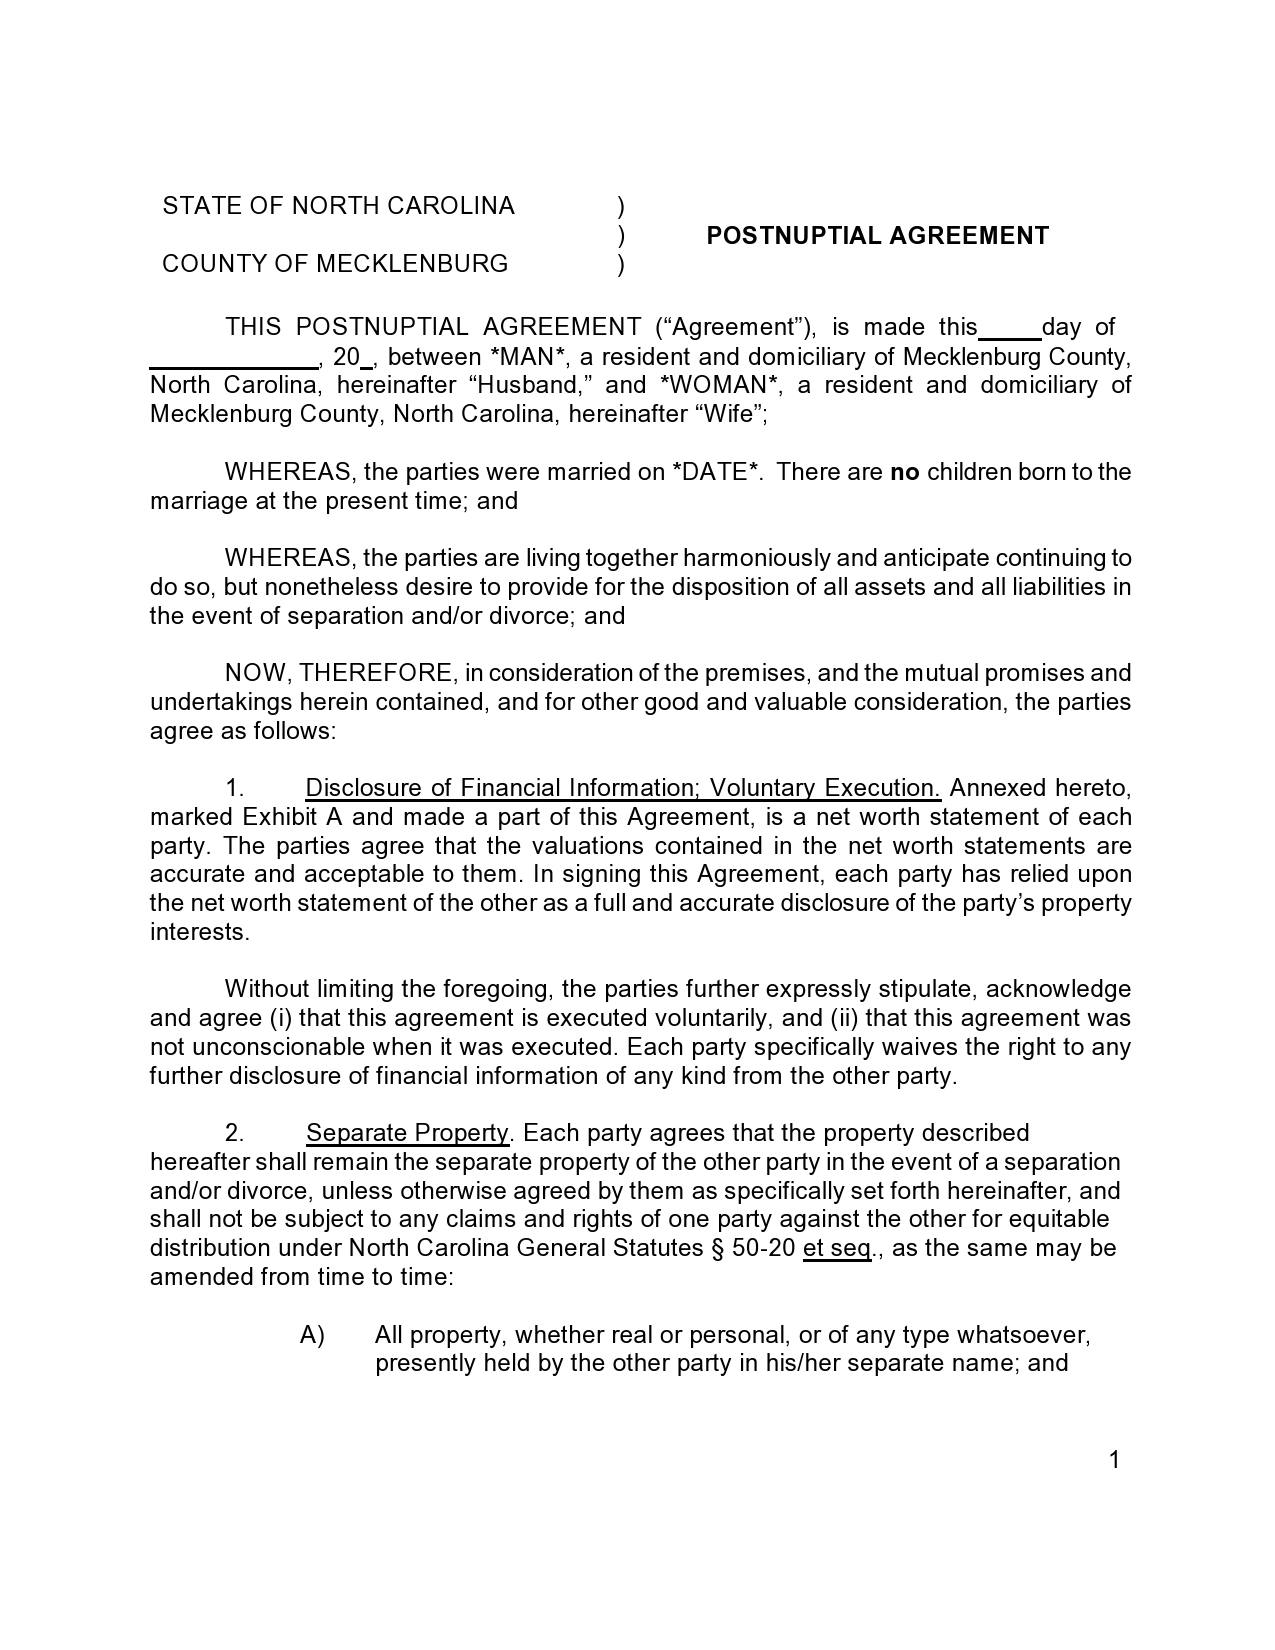 Free postnuptial agreement template 11